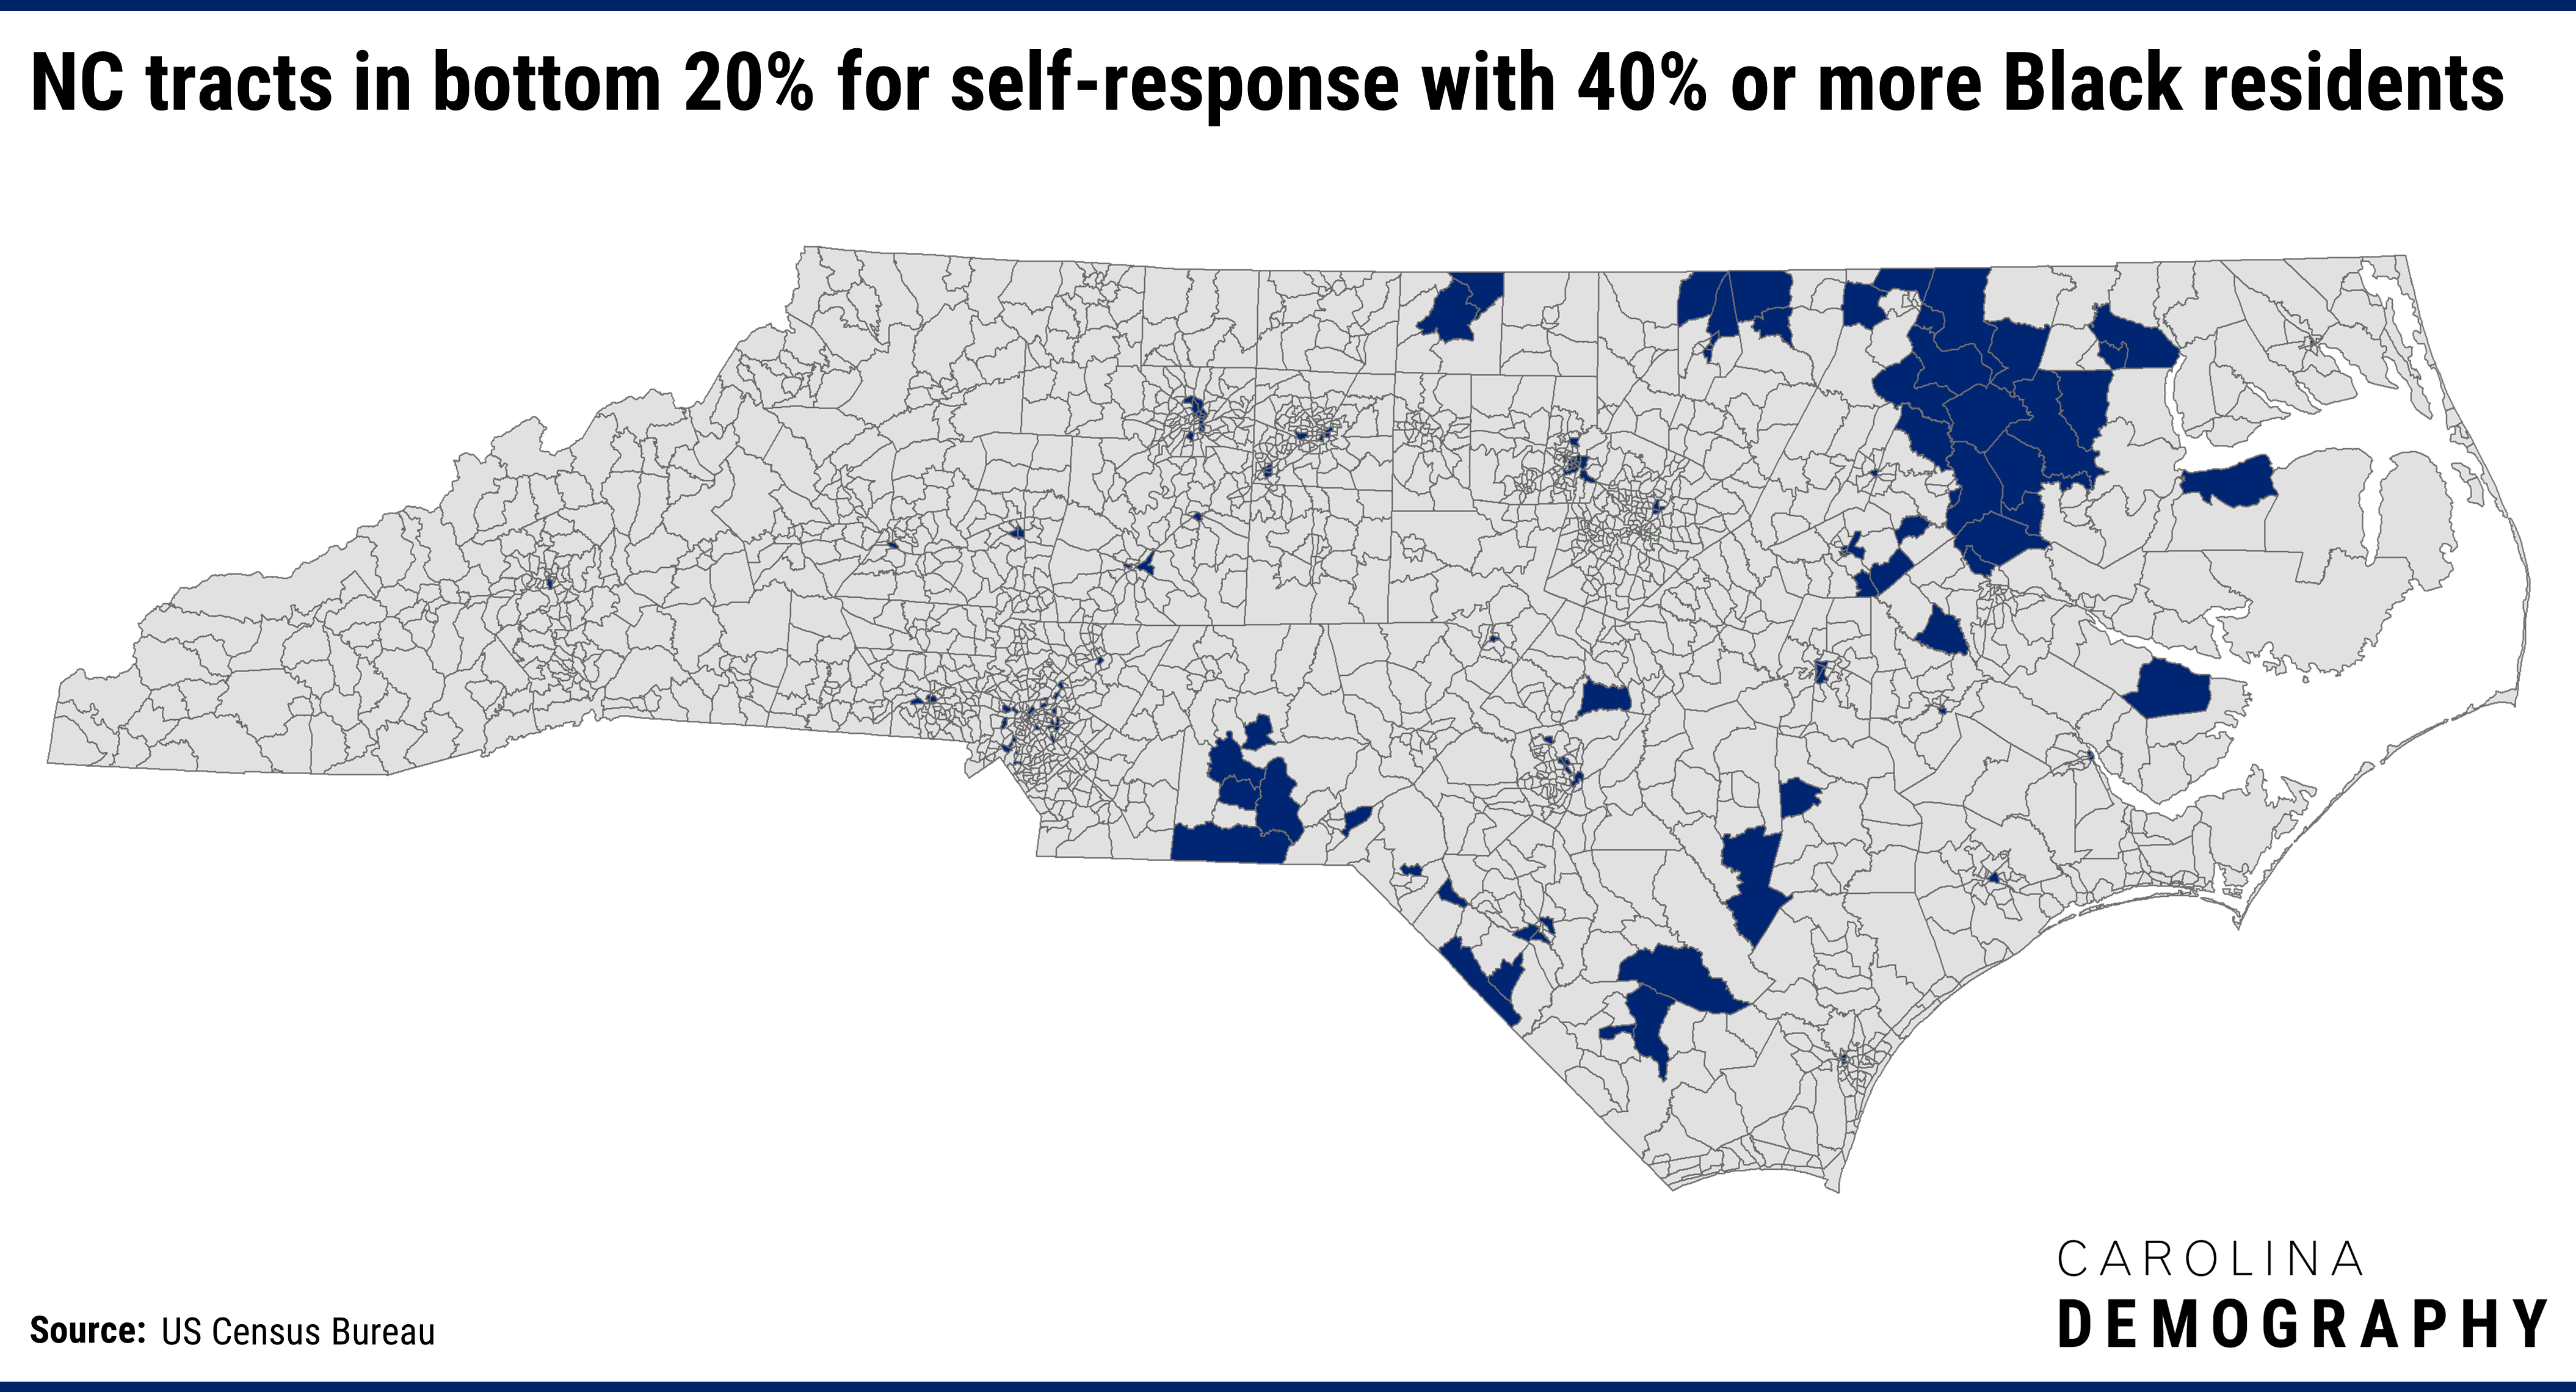 NC tracts in bottom 20% for self-response with 40% or more Black residents. Map of NC highlighting Census tracts clustered in the northeast and around Charlotte/ Sandhills area.